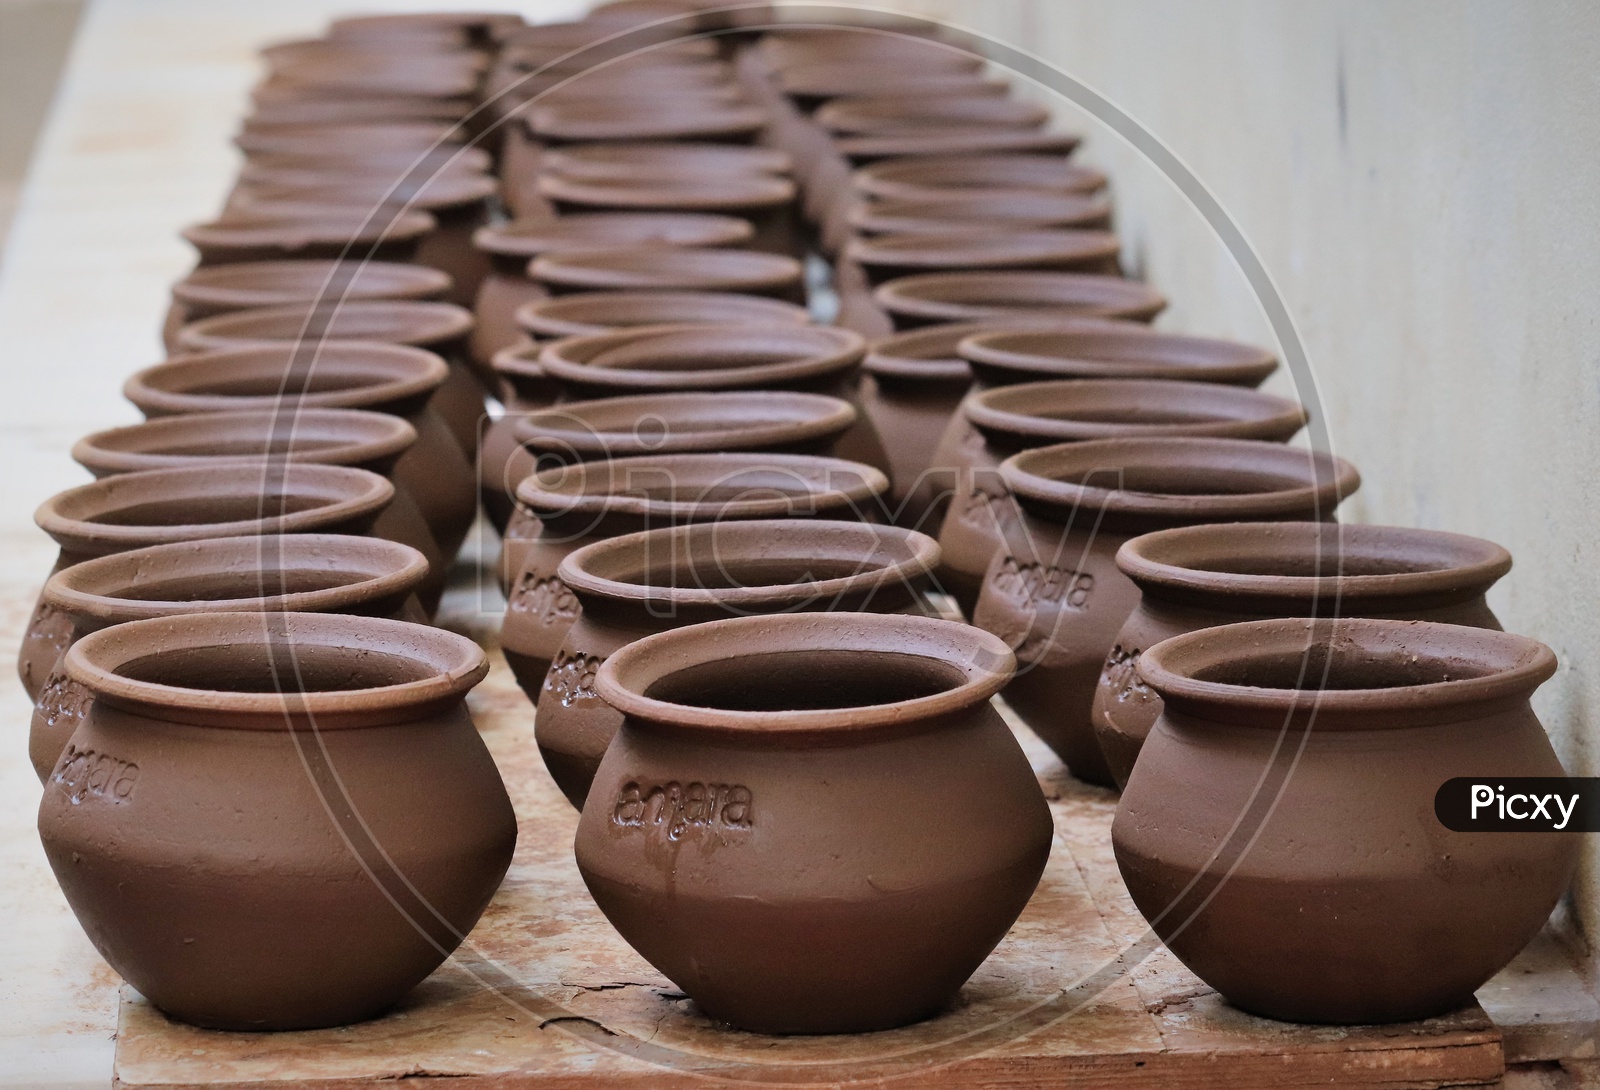 Freshly Sculpted Clay Pots Or Pottery By The Professional Potter Kept For Drying